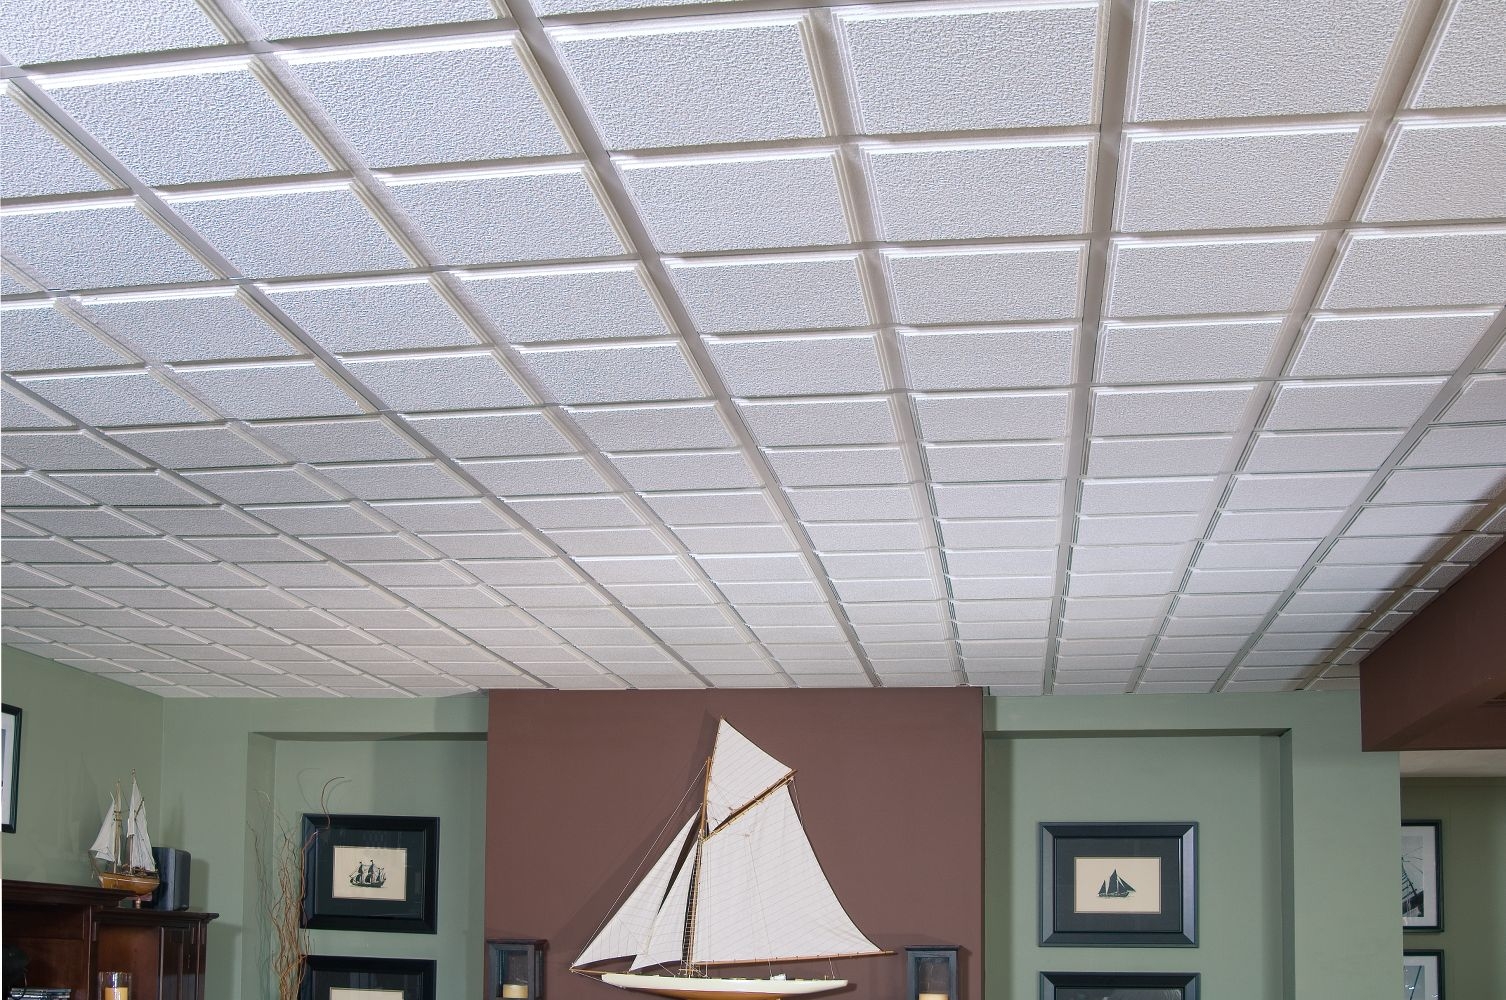 Armstrong Ceiling Tile Options Armstrong Ceiling Tile Options armstrong east side lumberyard supply co inc 1506 X 1000